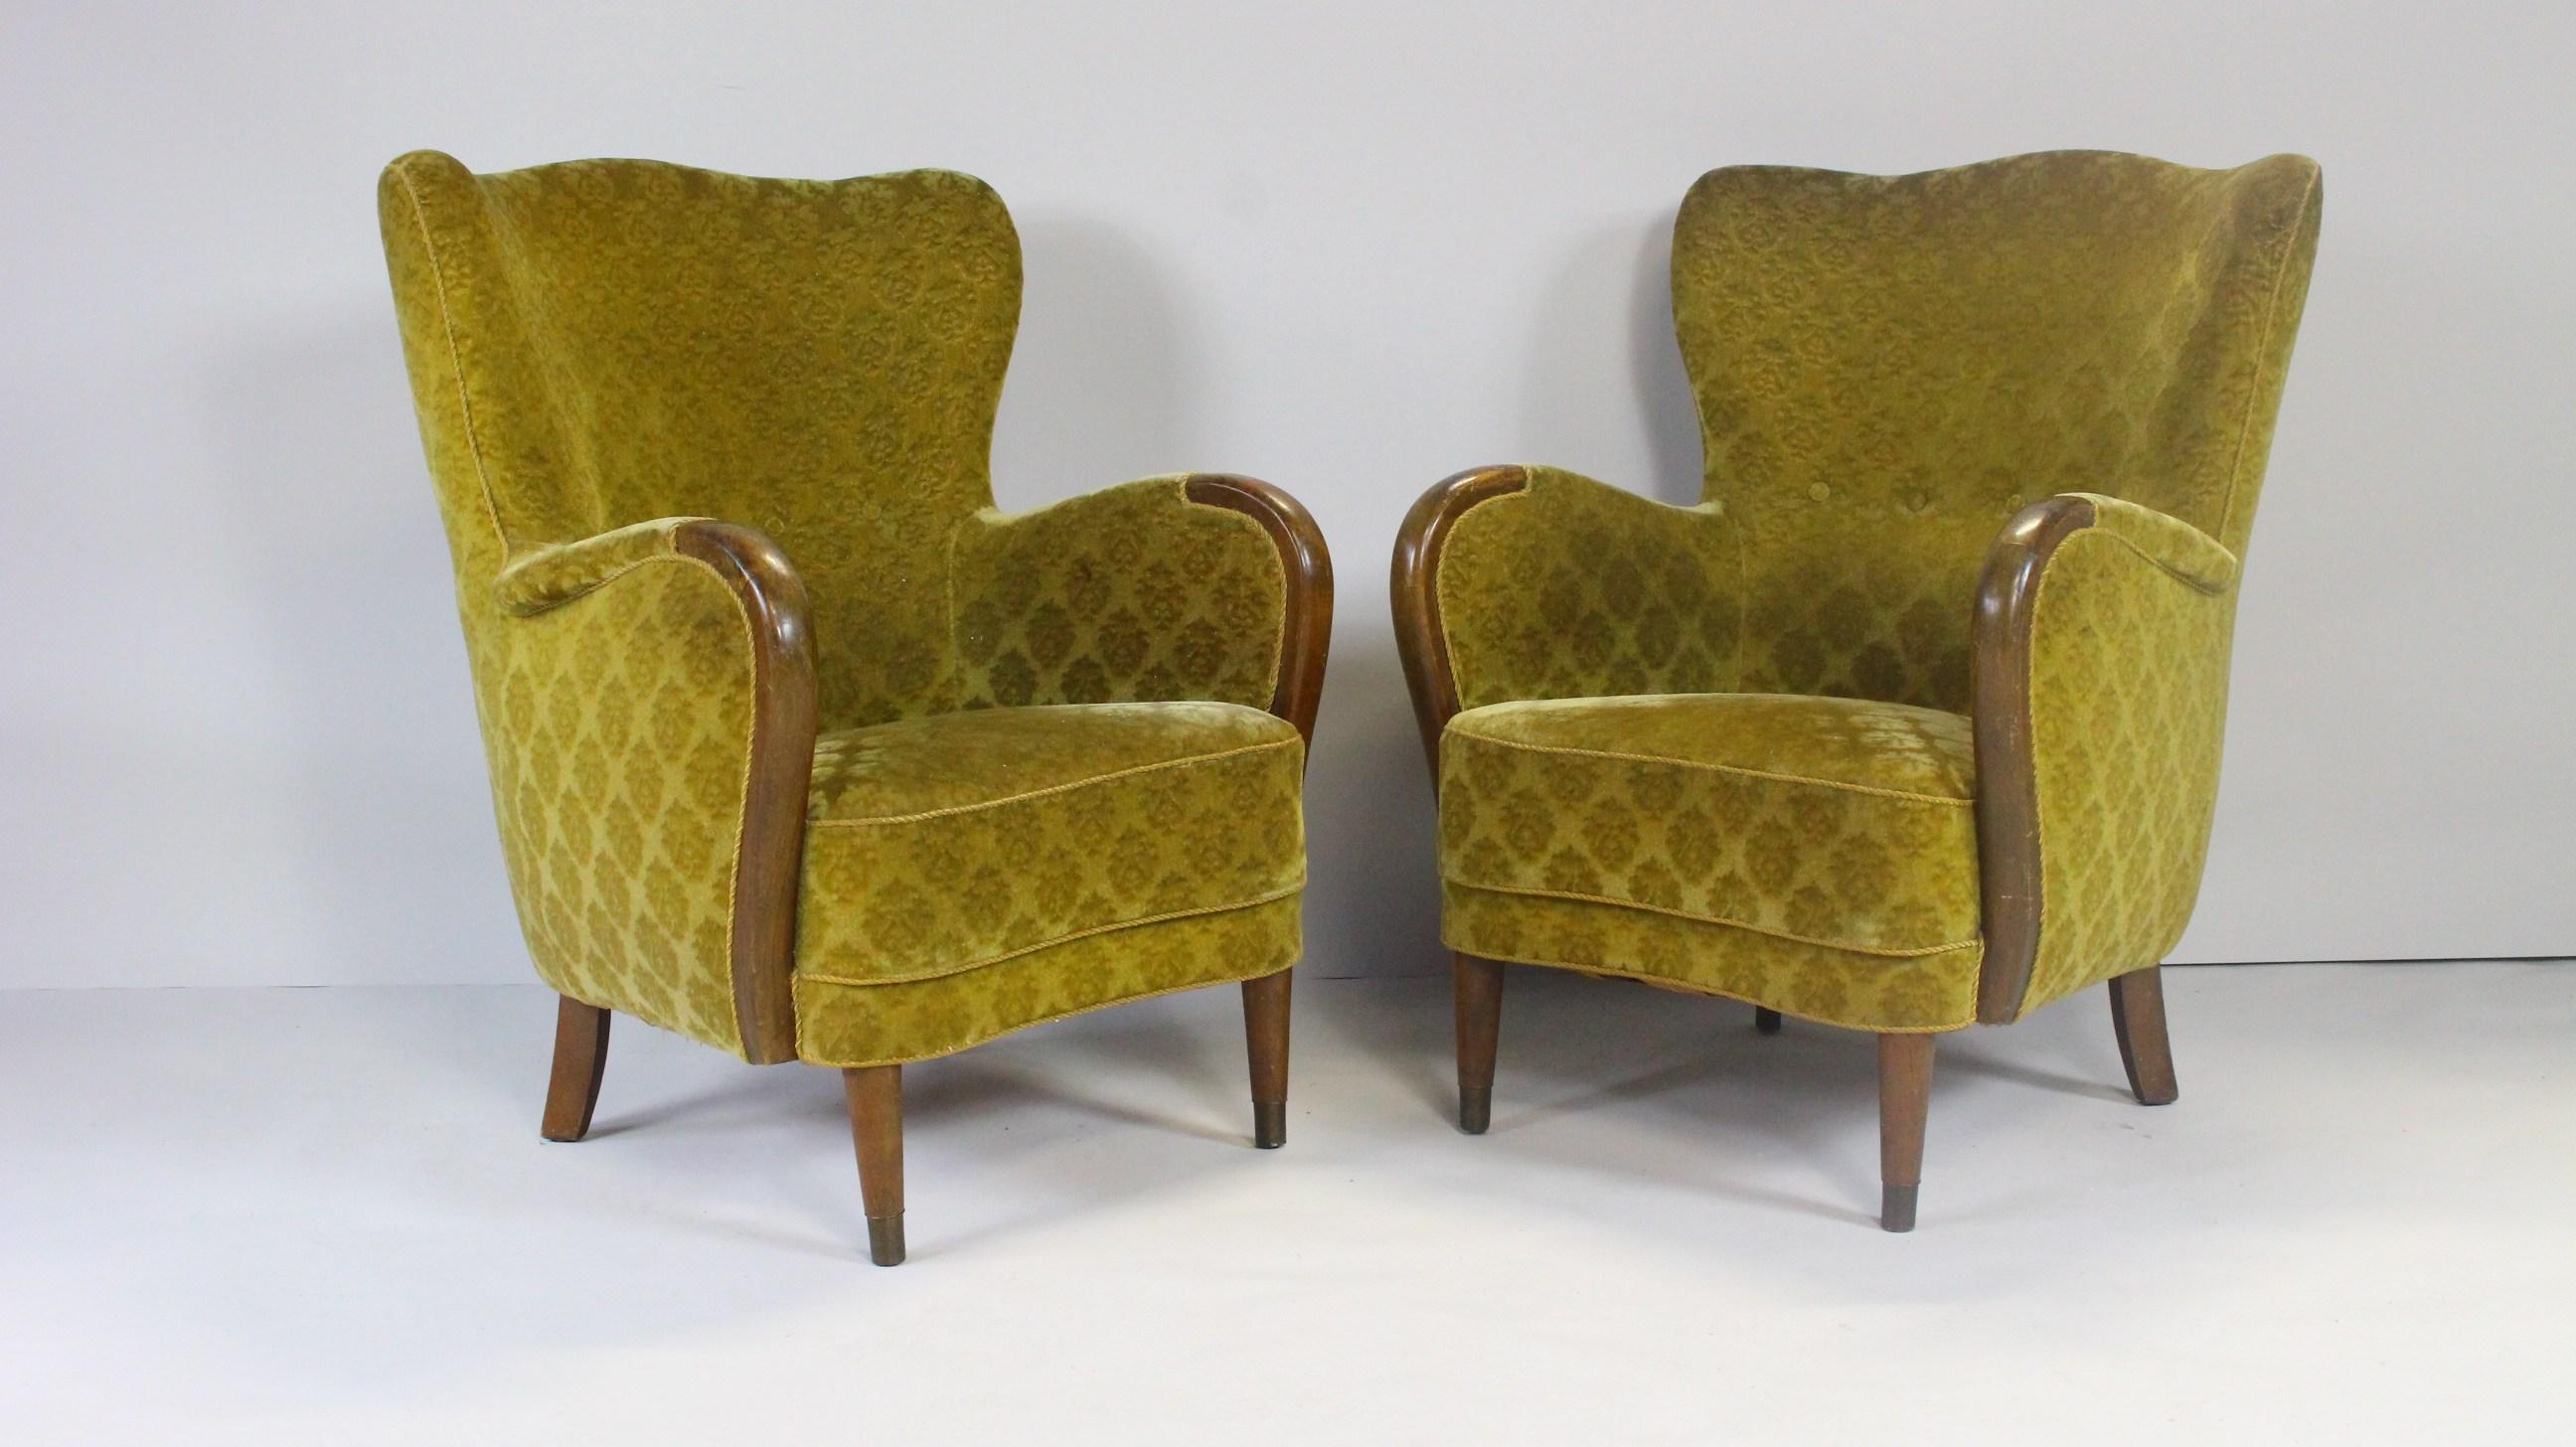 Pair of mid century armchair in honey color fabric.
Wooden armrests and legs finished with brass.
The oval backrest gives a comfortable rest.
Price for pair.
Available the sofa for this set.